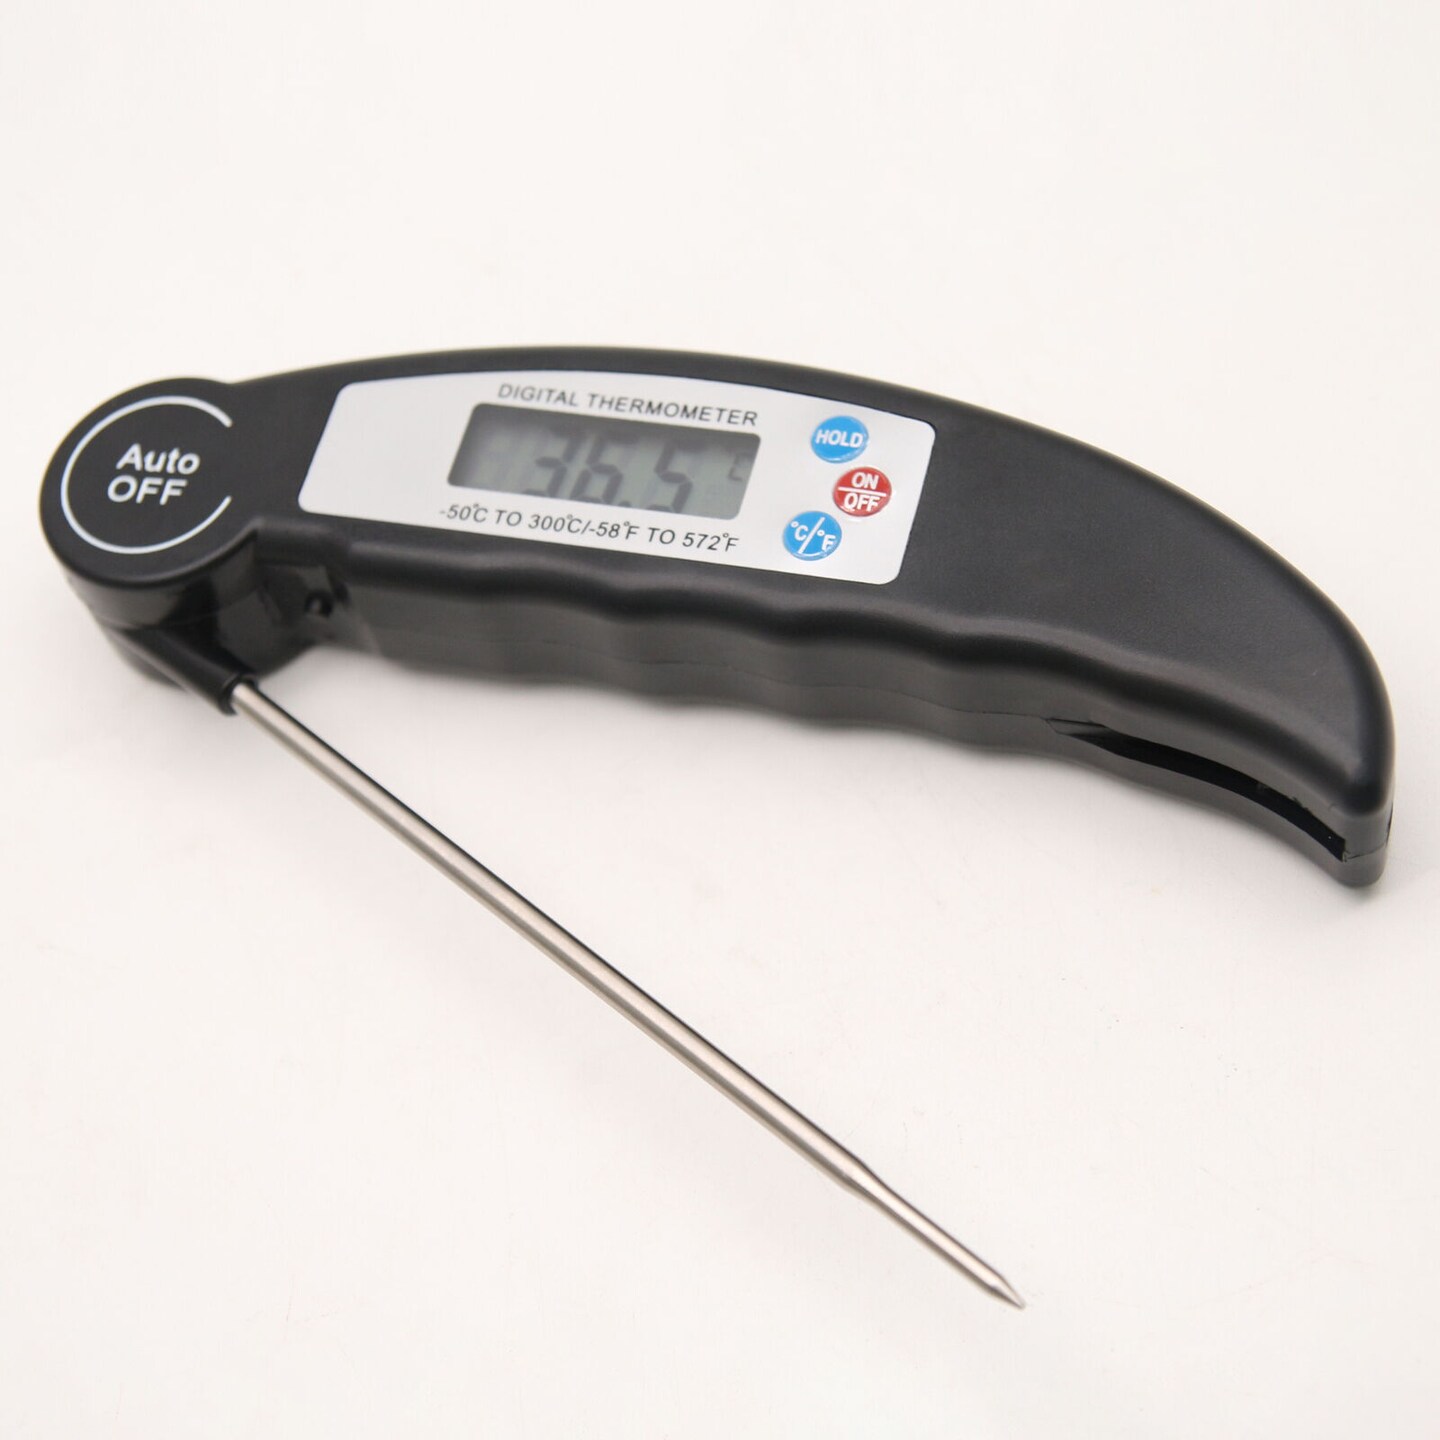 Collapsible LCD Digital Food Thermometer